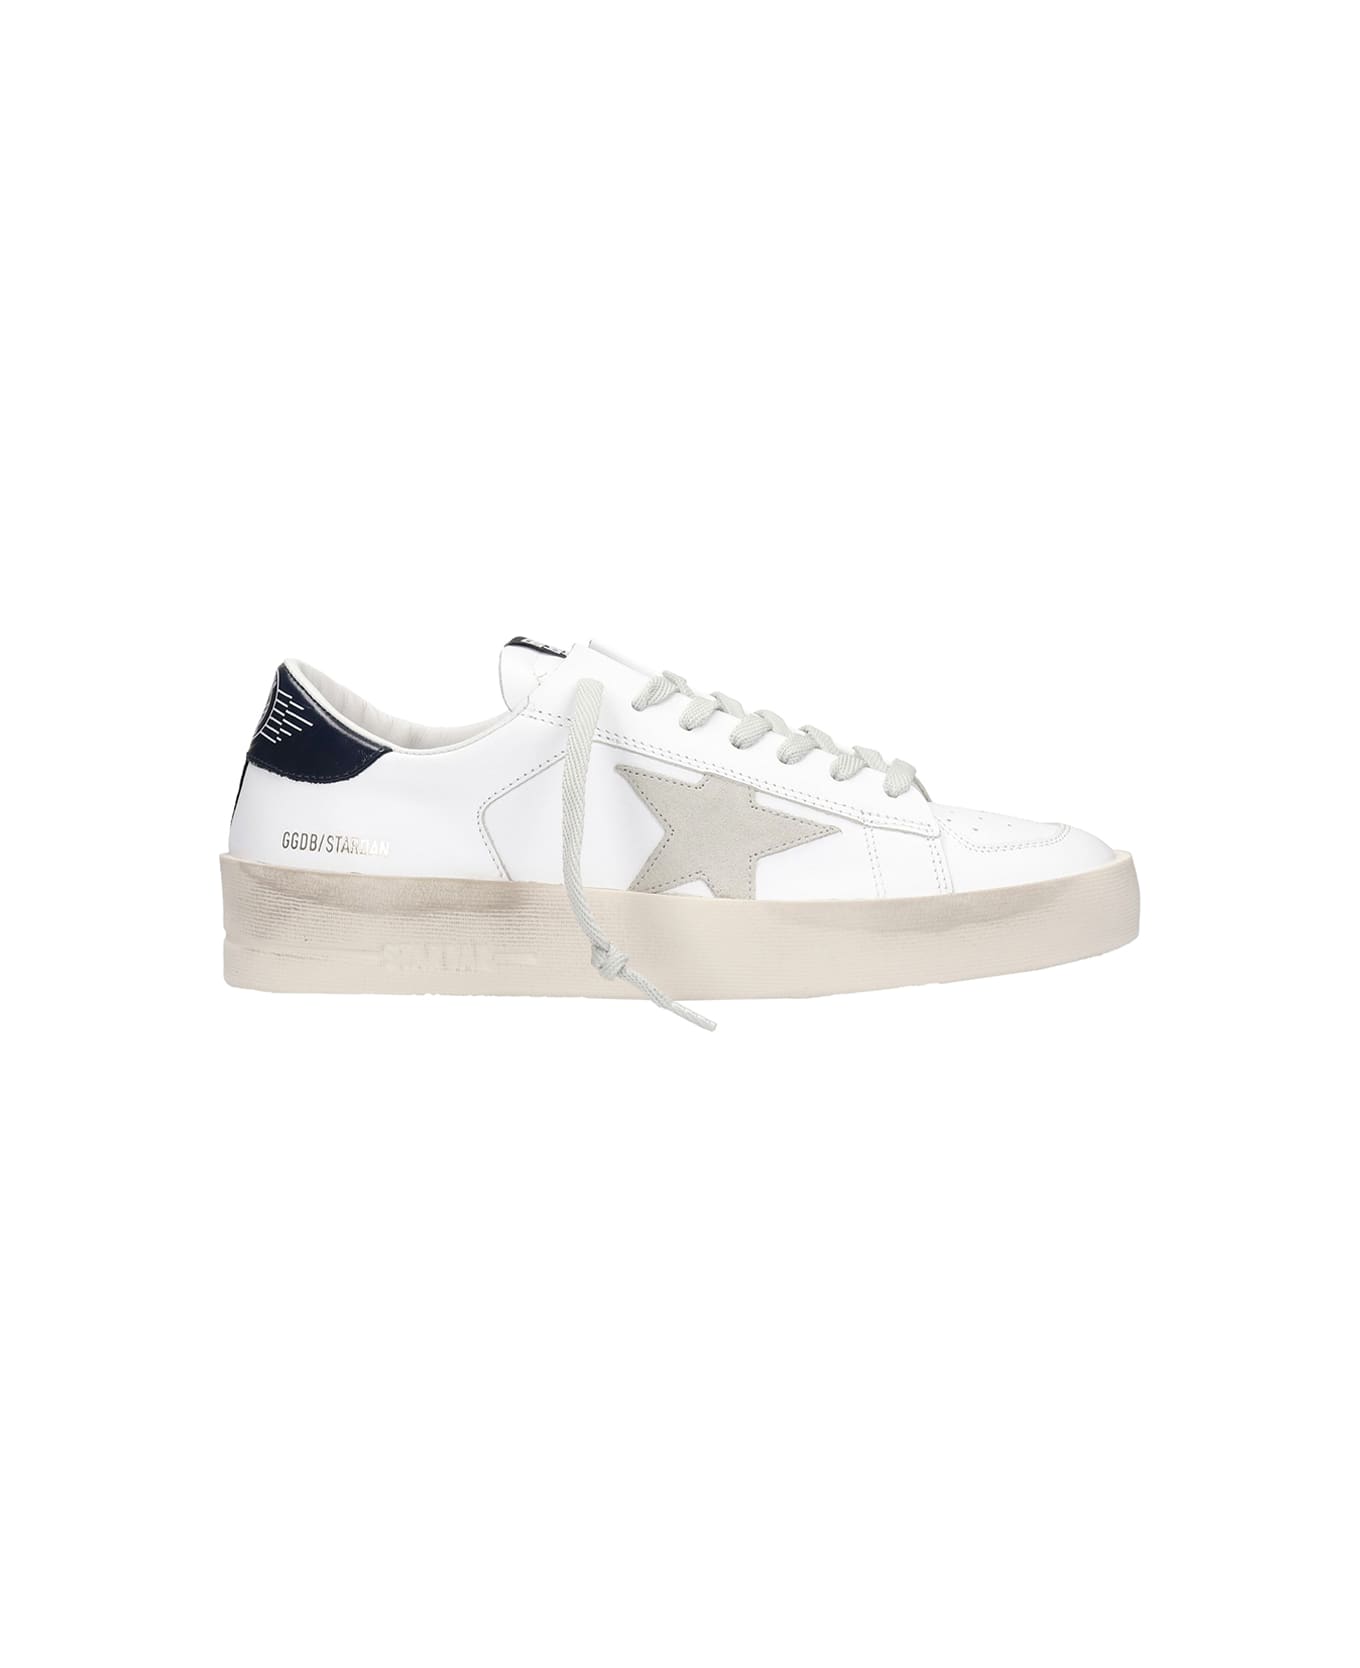 Golden Goose Stardan Leather Upper Suede Star Sneakers - White Ice Blue スニーカー